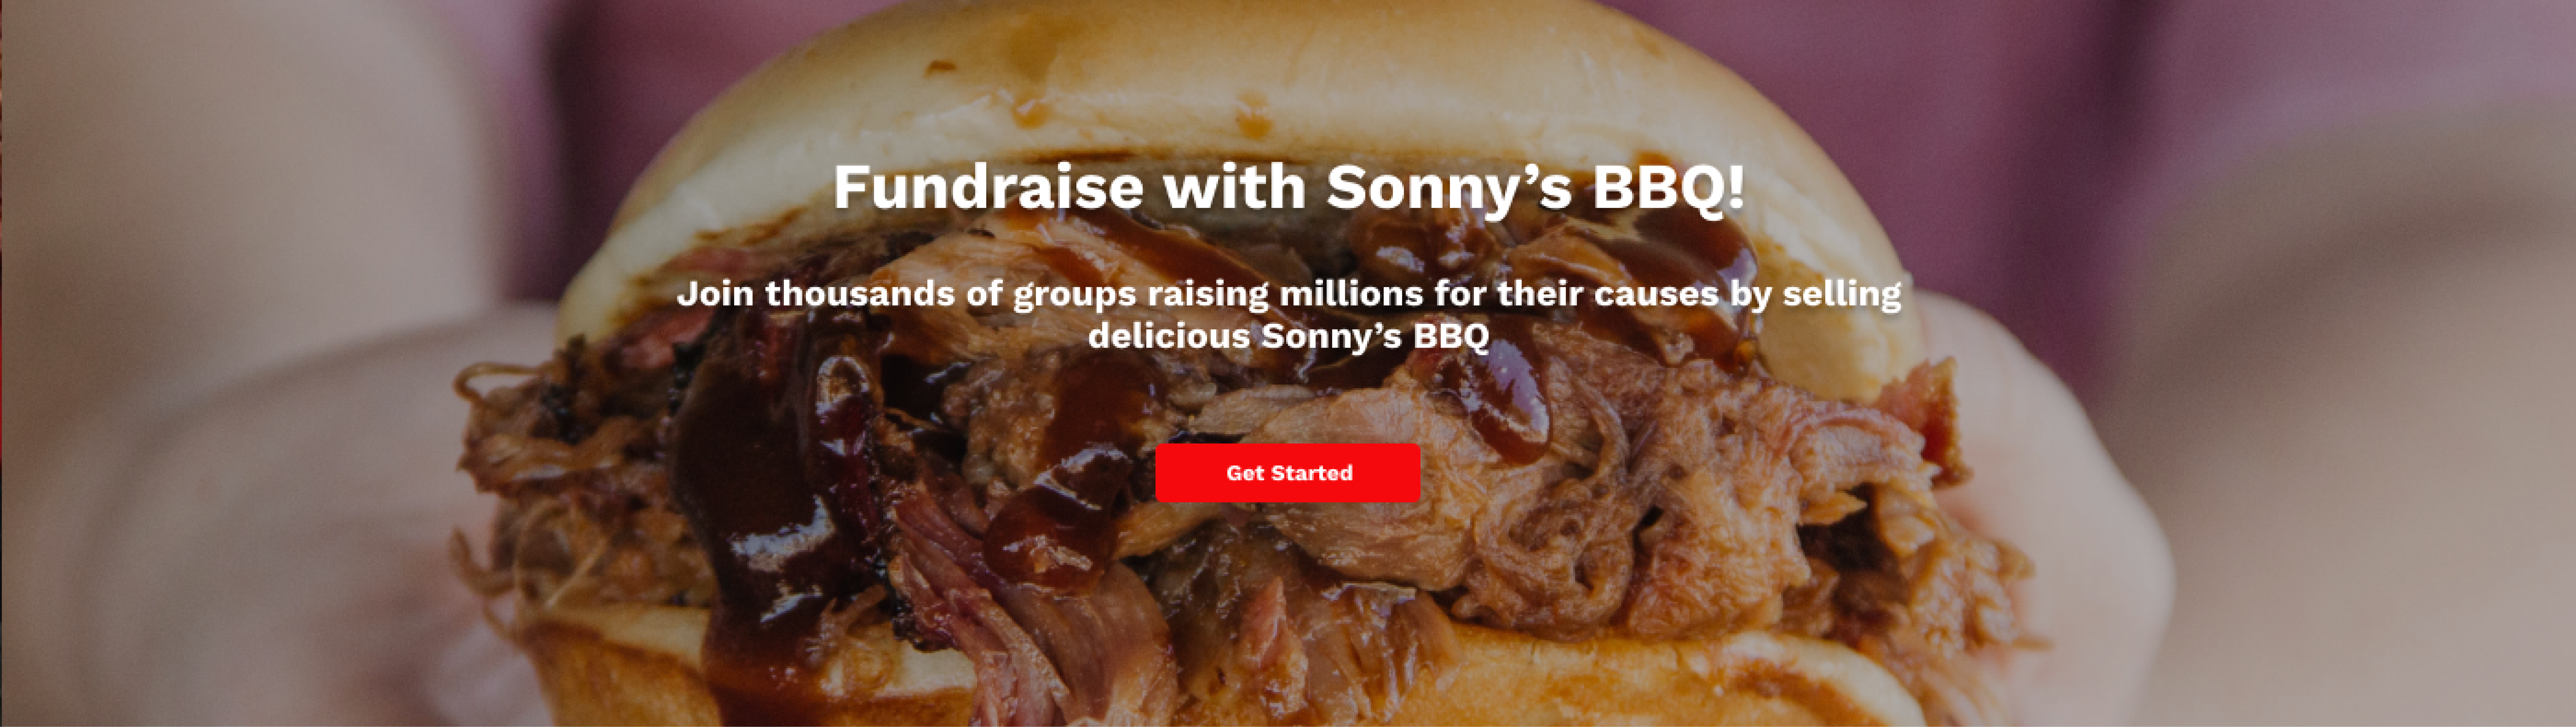 Sonny's BBQ Fundraising Campaign enrollment page